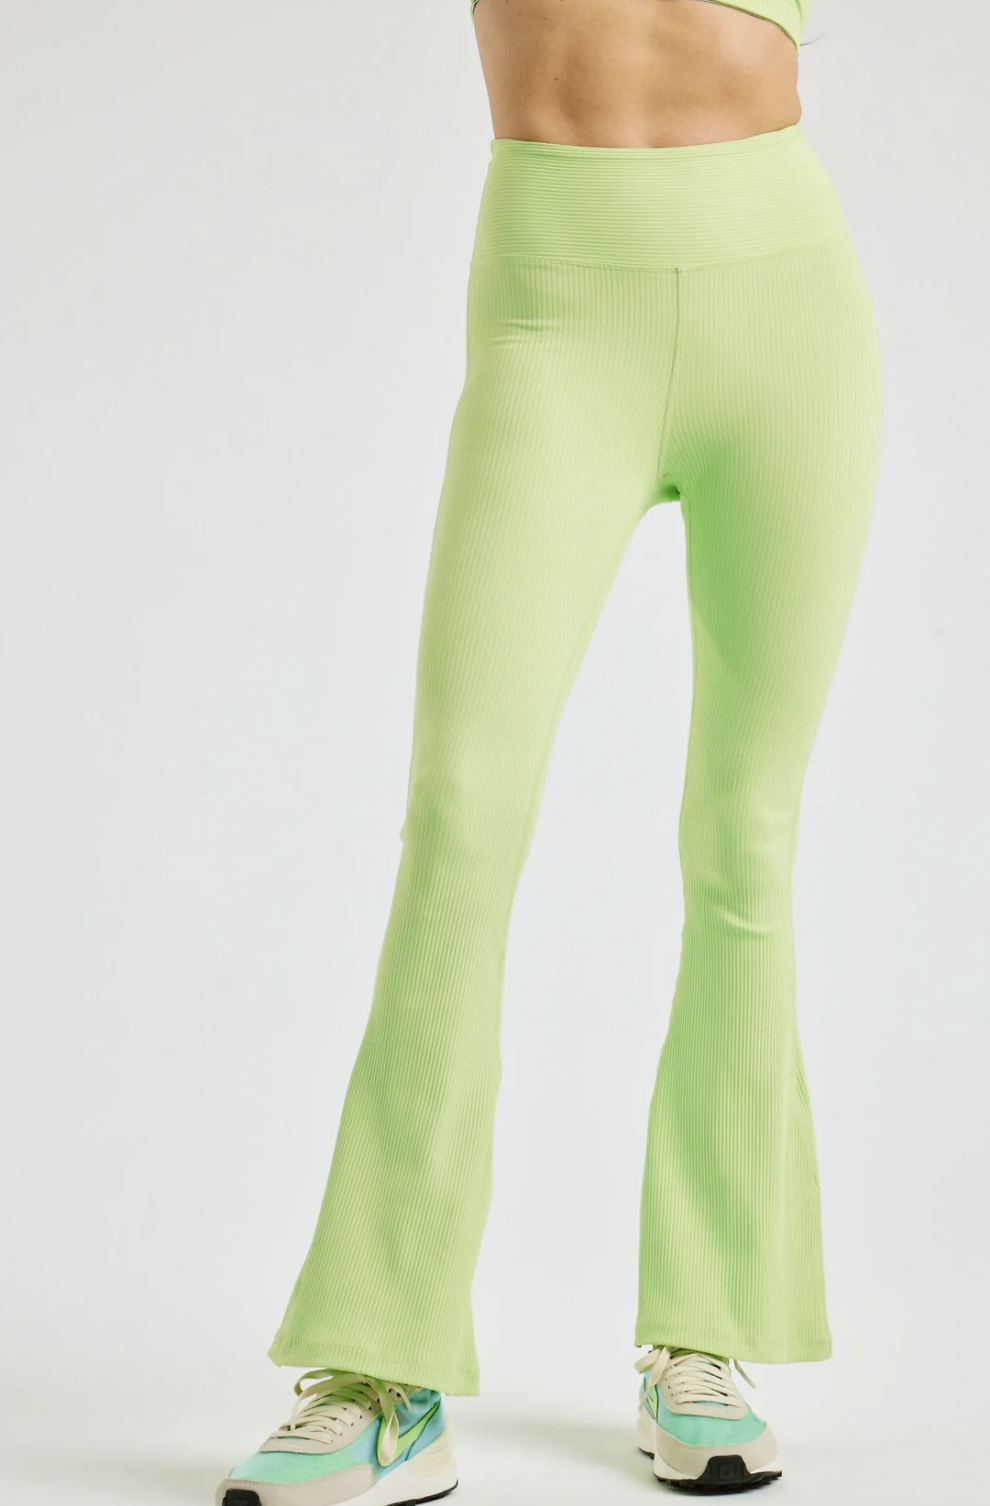 Flared Athletic Pants Are The New Leggings - theFashionSpot